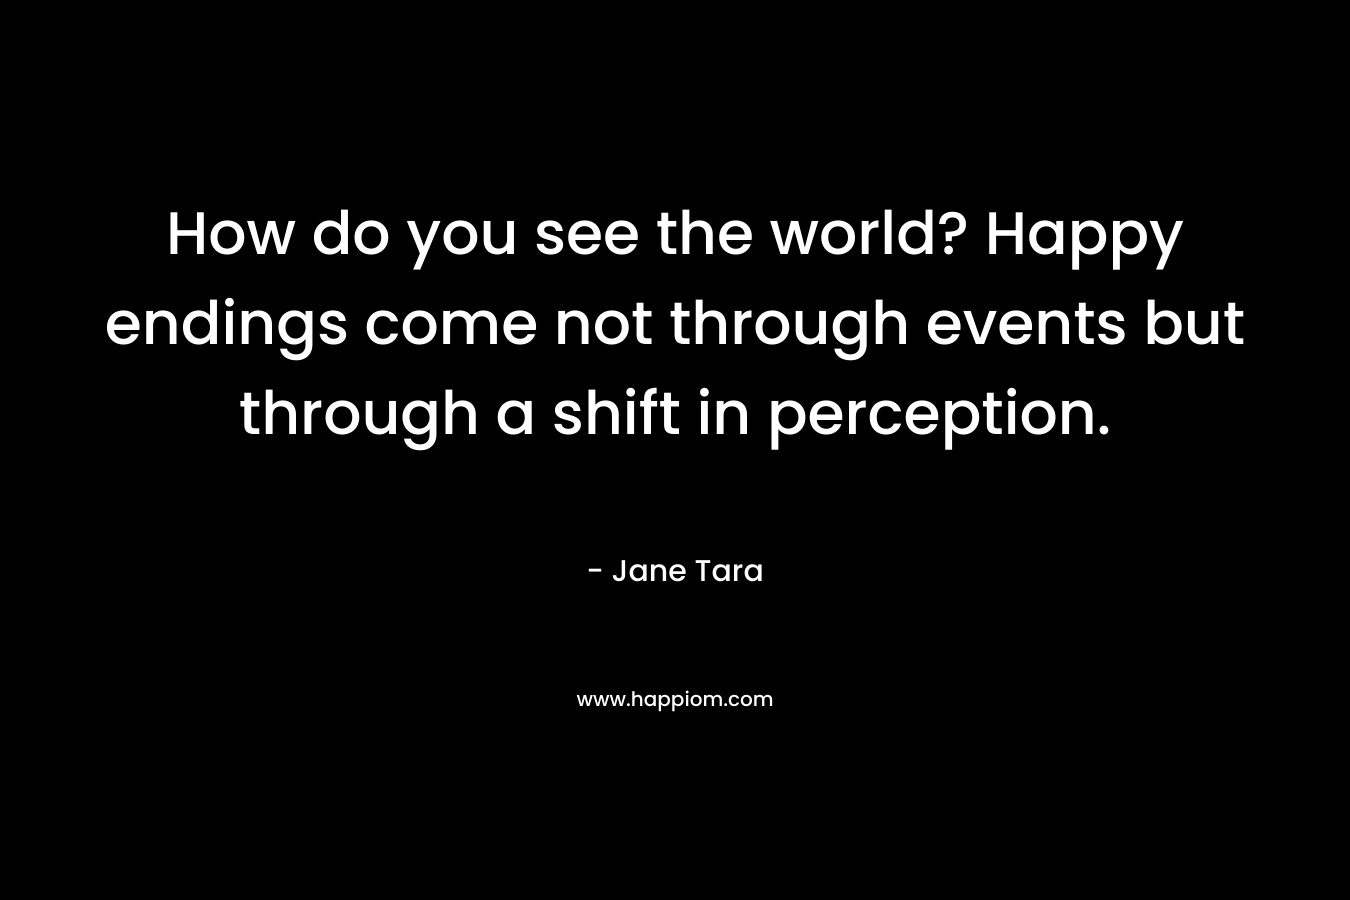 How do you see the world? Happy endings come not through events but through a shift in perception.